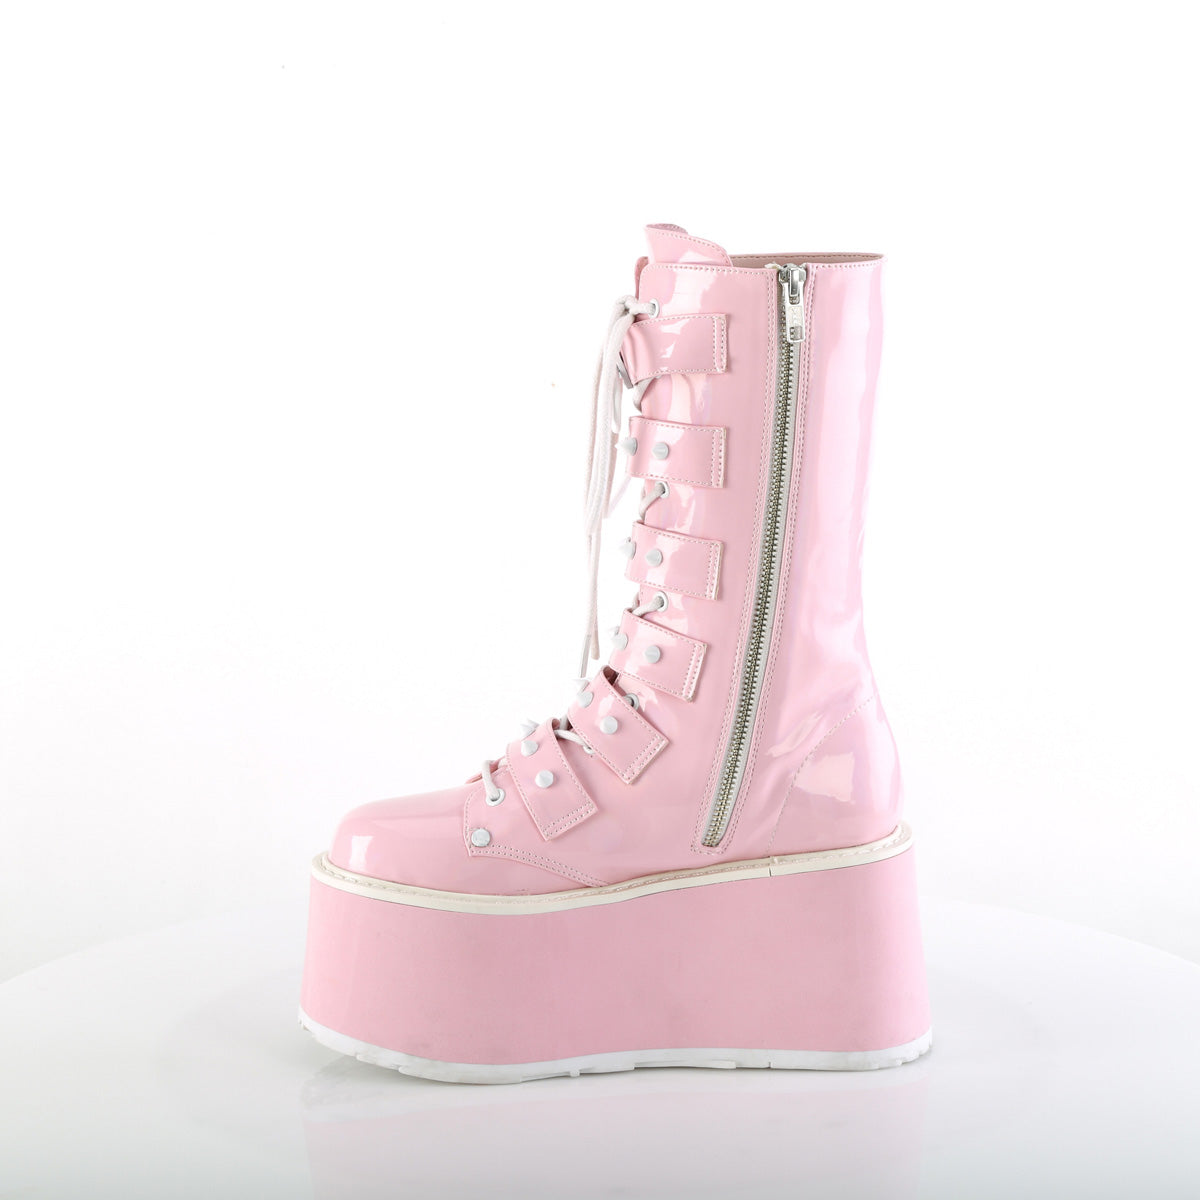 DemoniaCult  Boots DAMNED-225 B. Pink Holo Pat